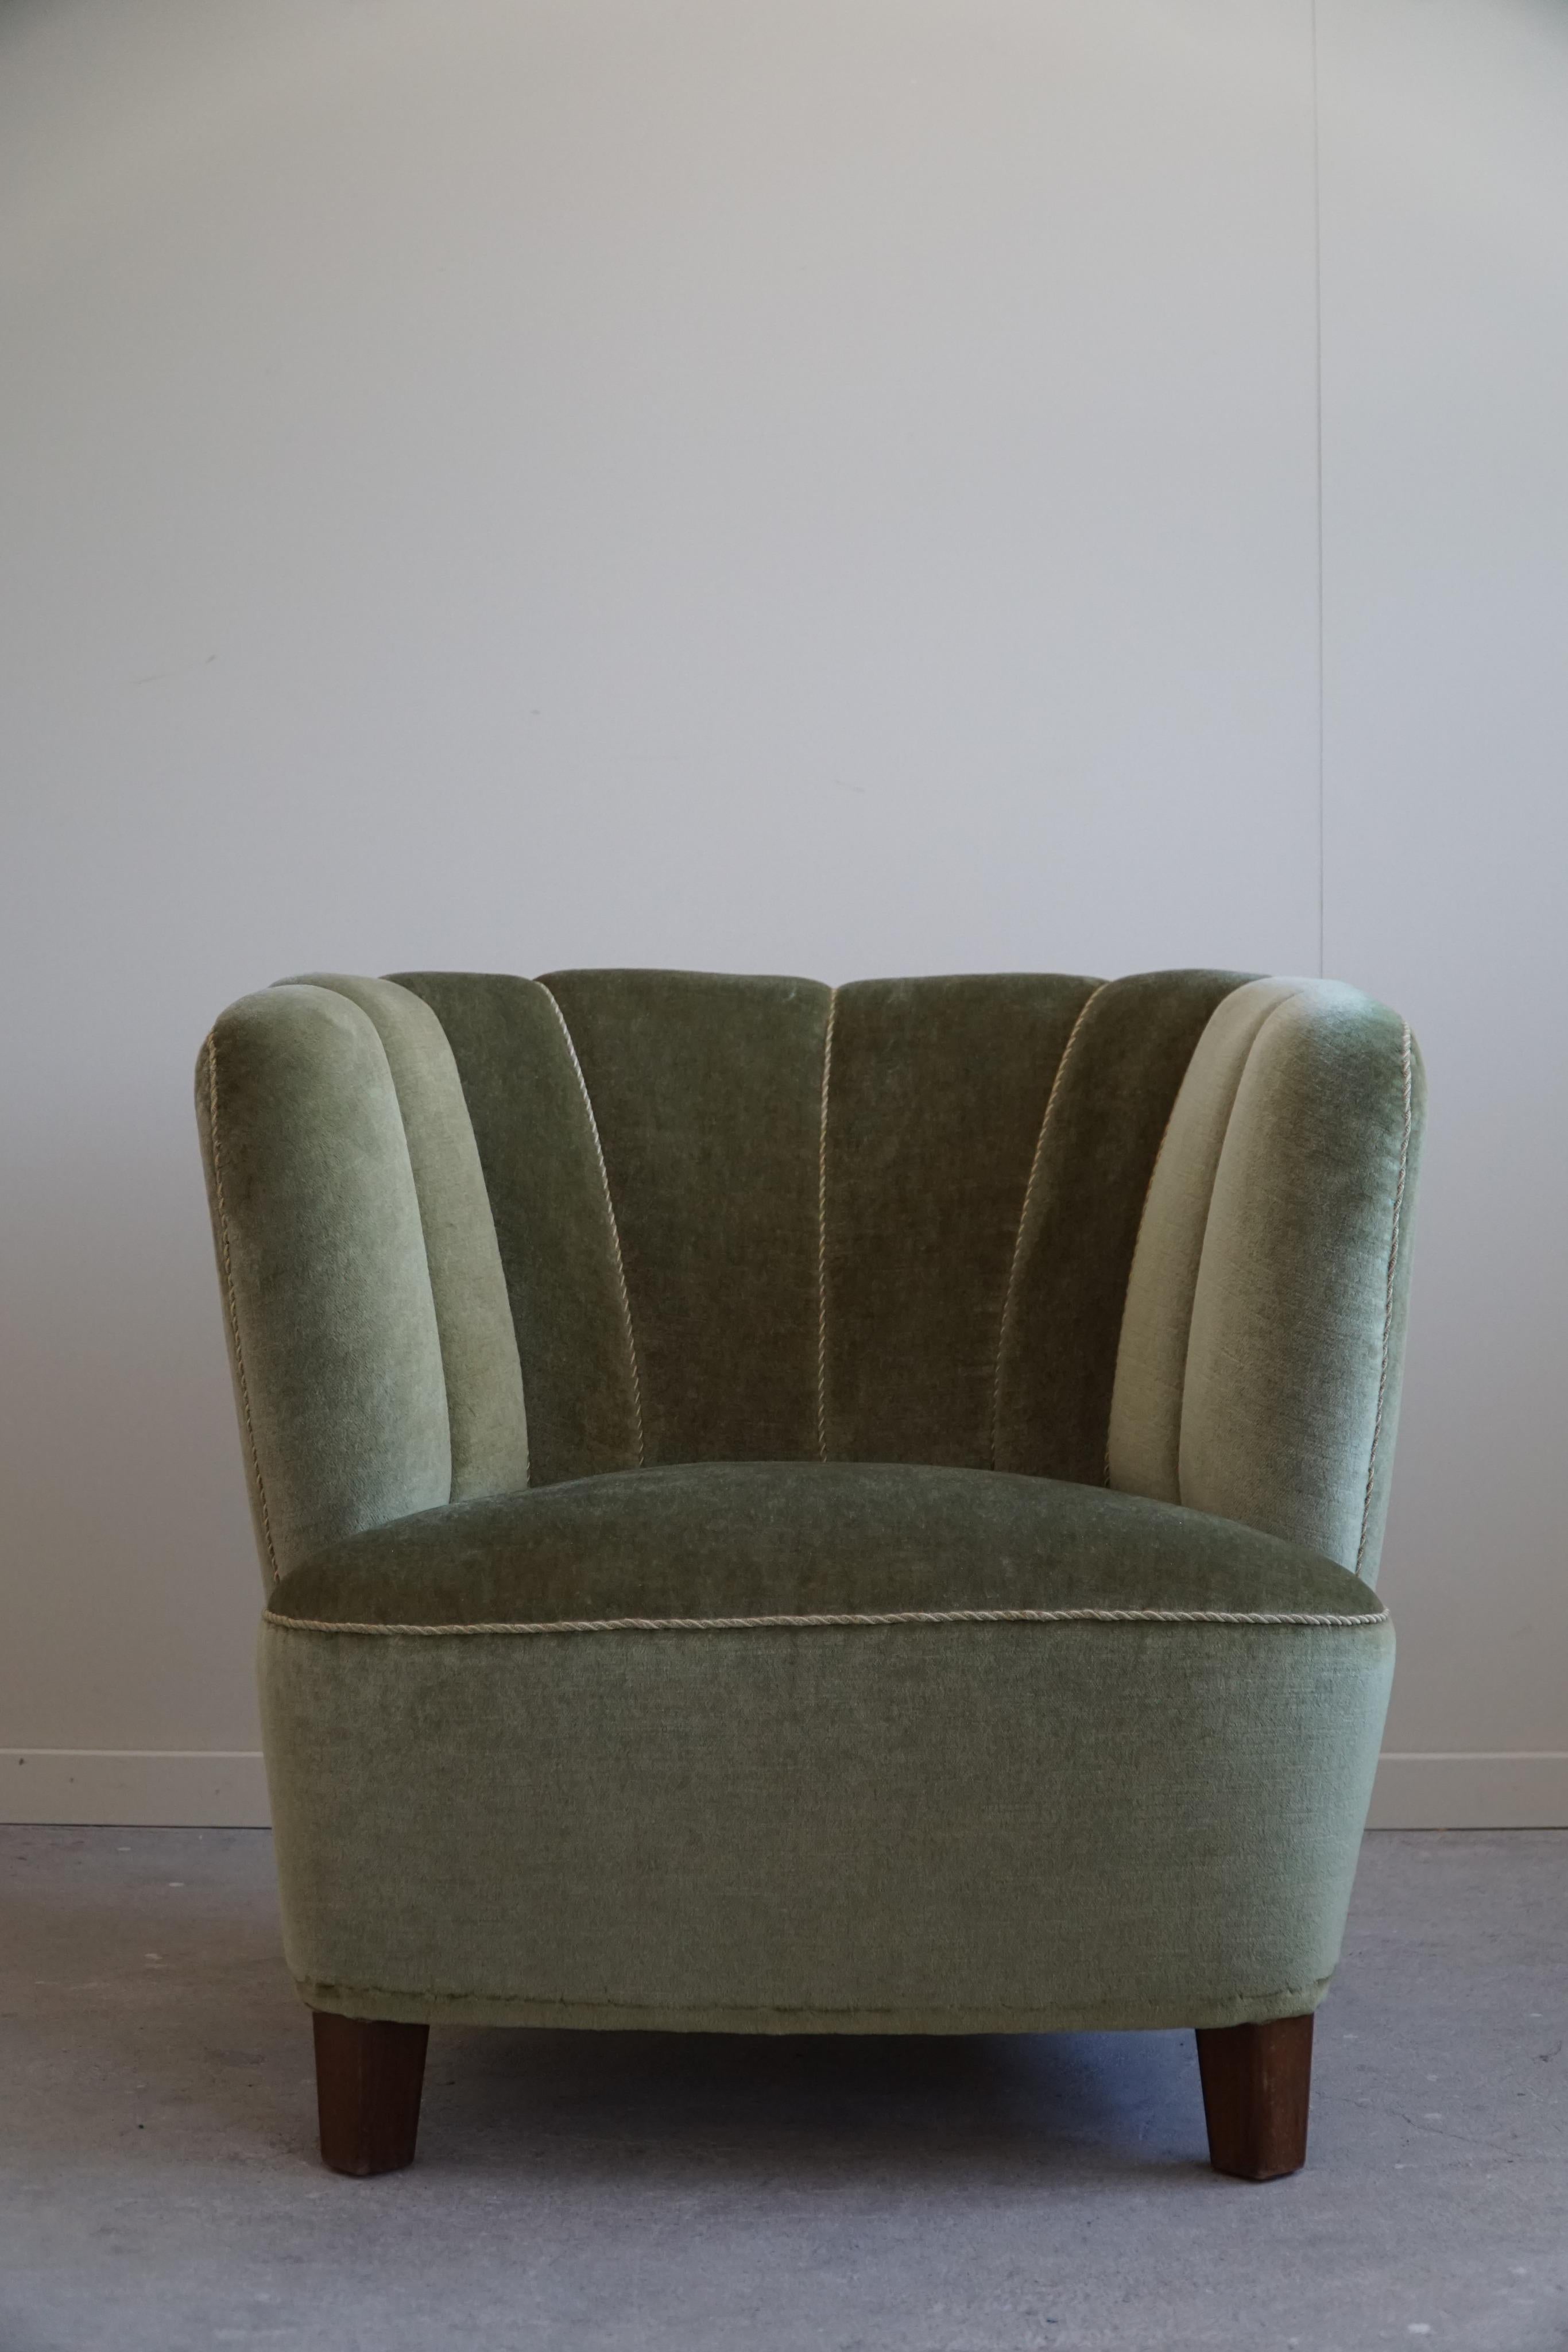 Danish Midcentury, Curved Club Chair, Viggo Boesen Style, 1940s In Good Condition For Sale In Odense, DK